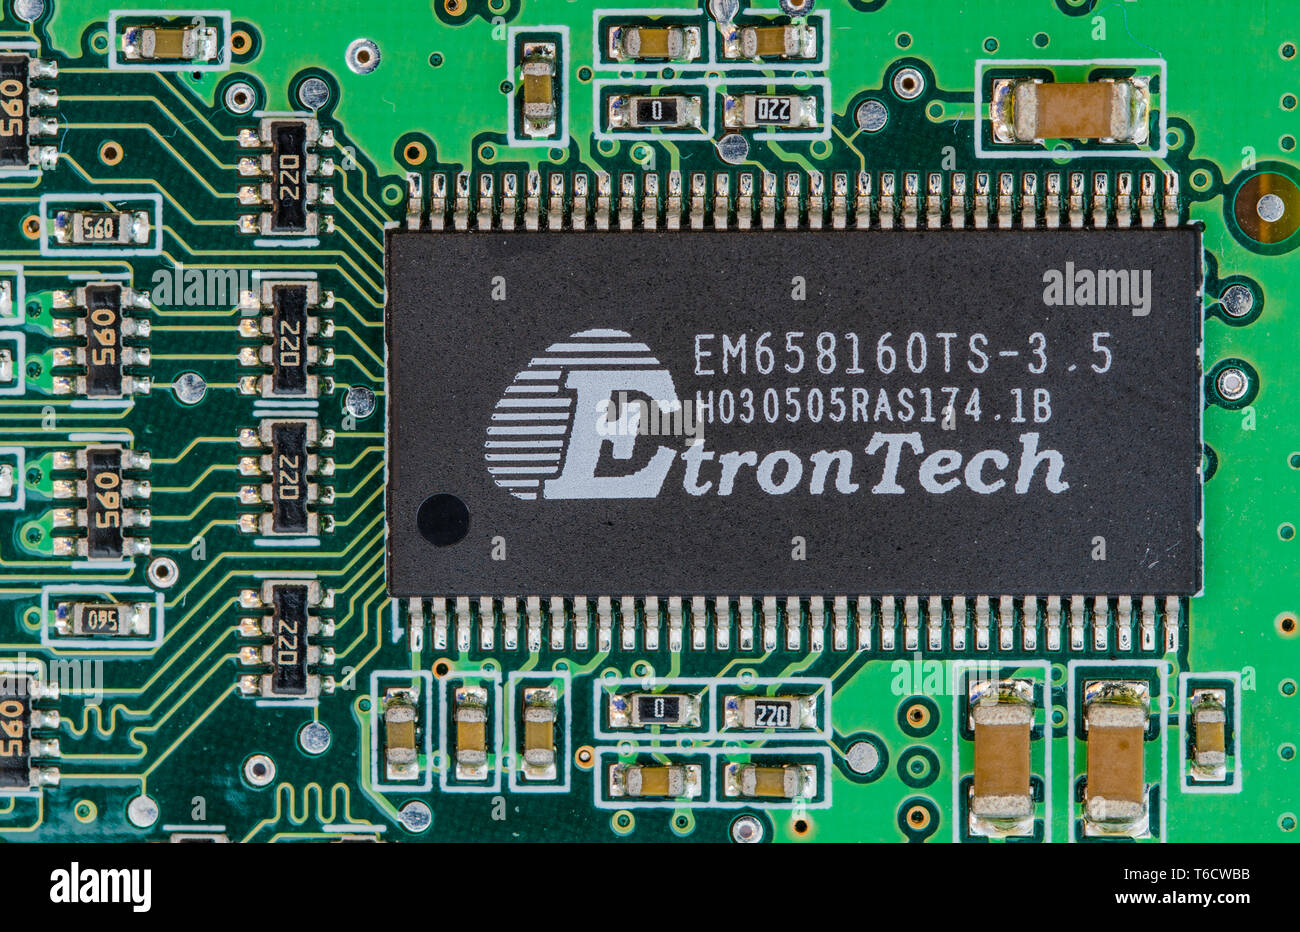 Dual in line (DIL or DIP) package surface mount technology (SMT) EtronTech chip mounted in a PCB. Electronics circuit board macro closeup. Stock Photo